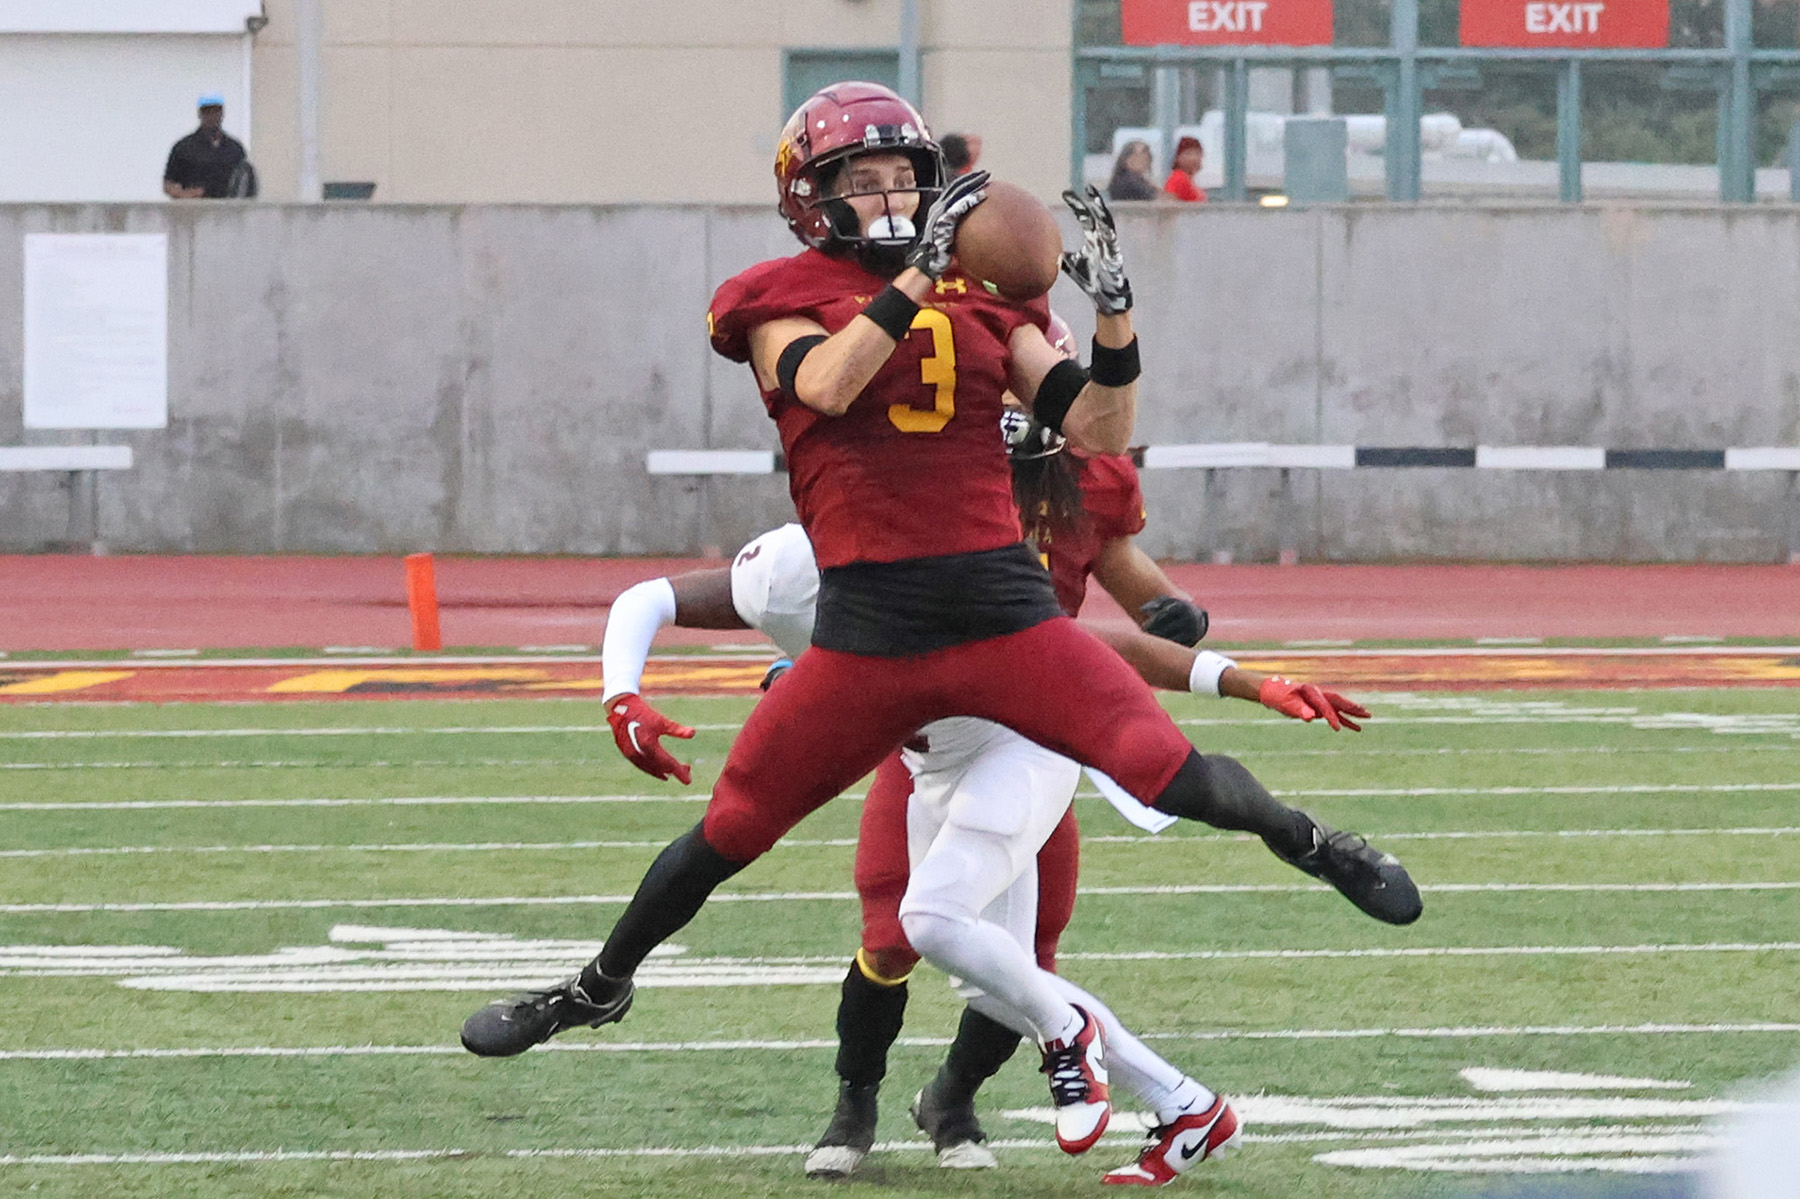 Eli Moulton makes one of his two interceptions here in PCC's season-opening win v. Santa Ana on Friday (photo by Richard Quinton).